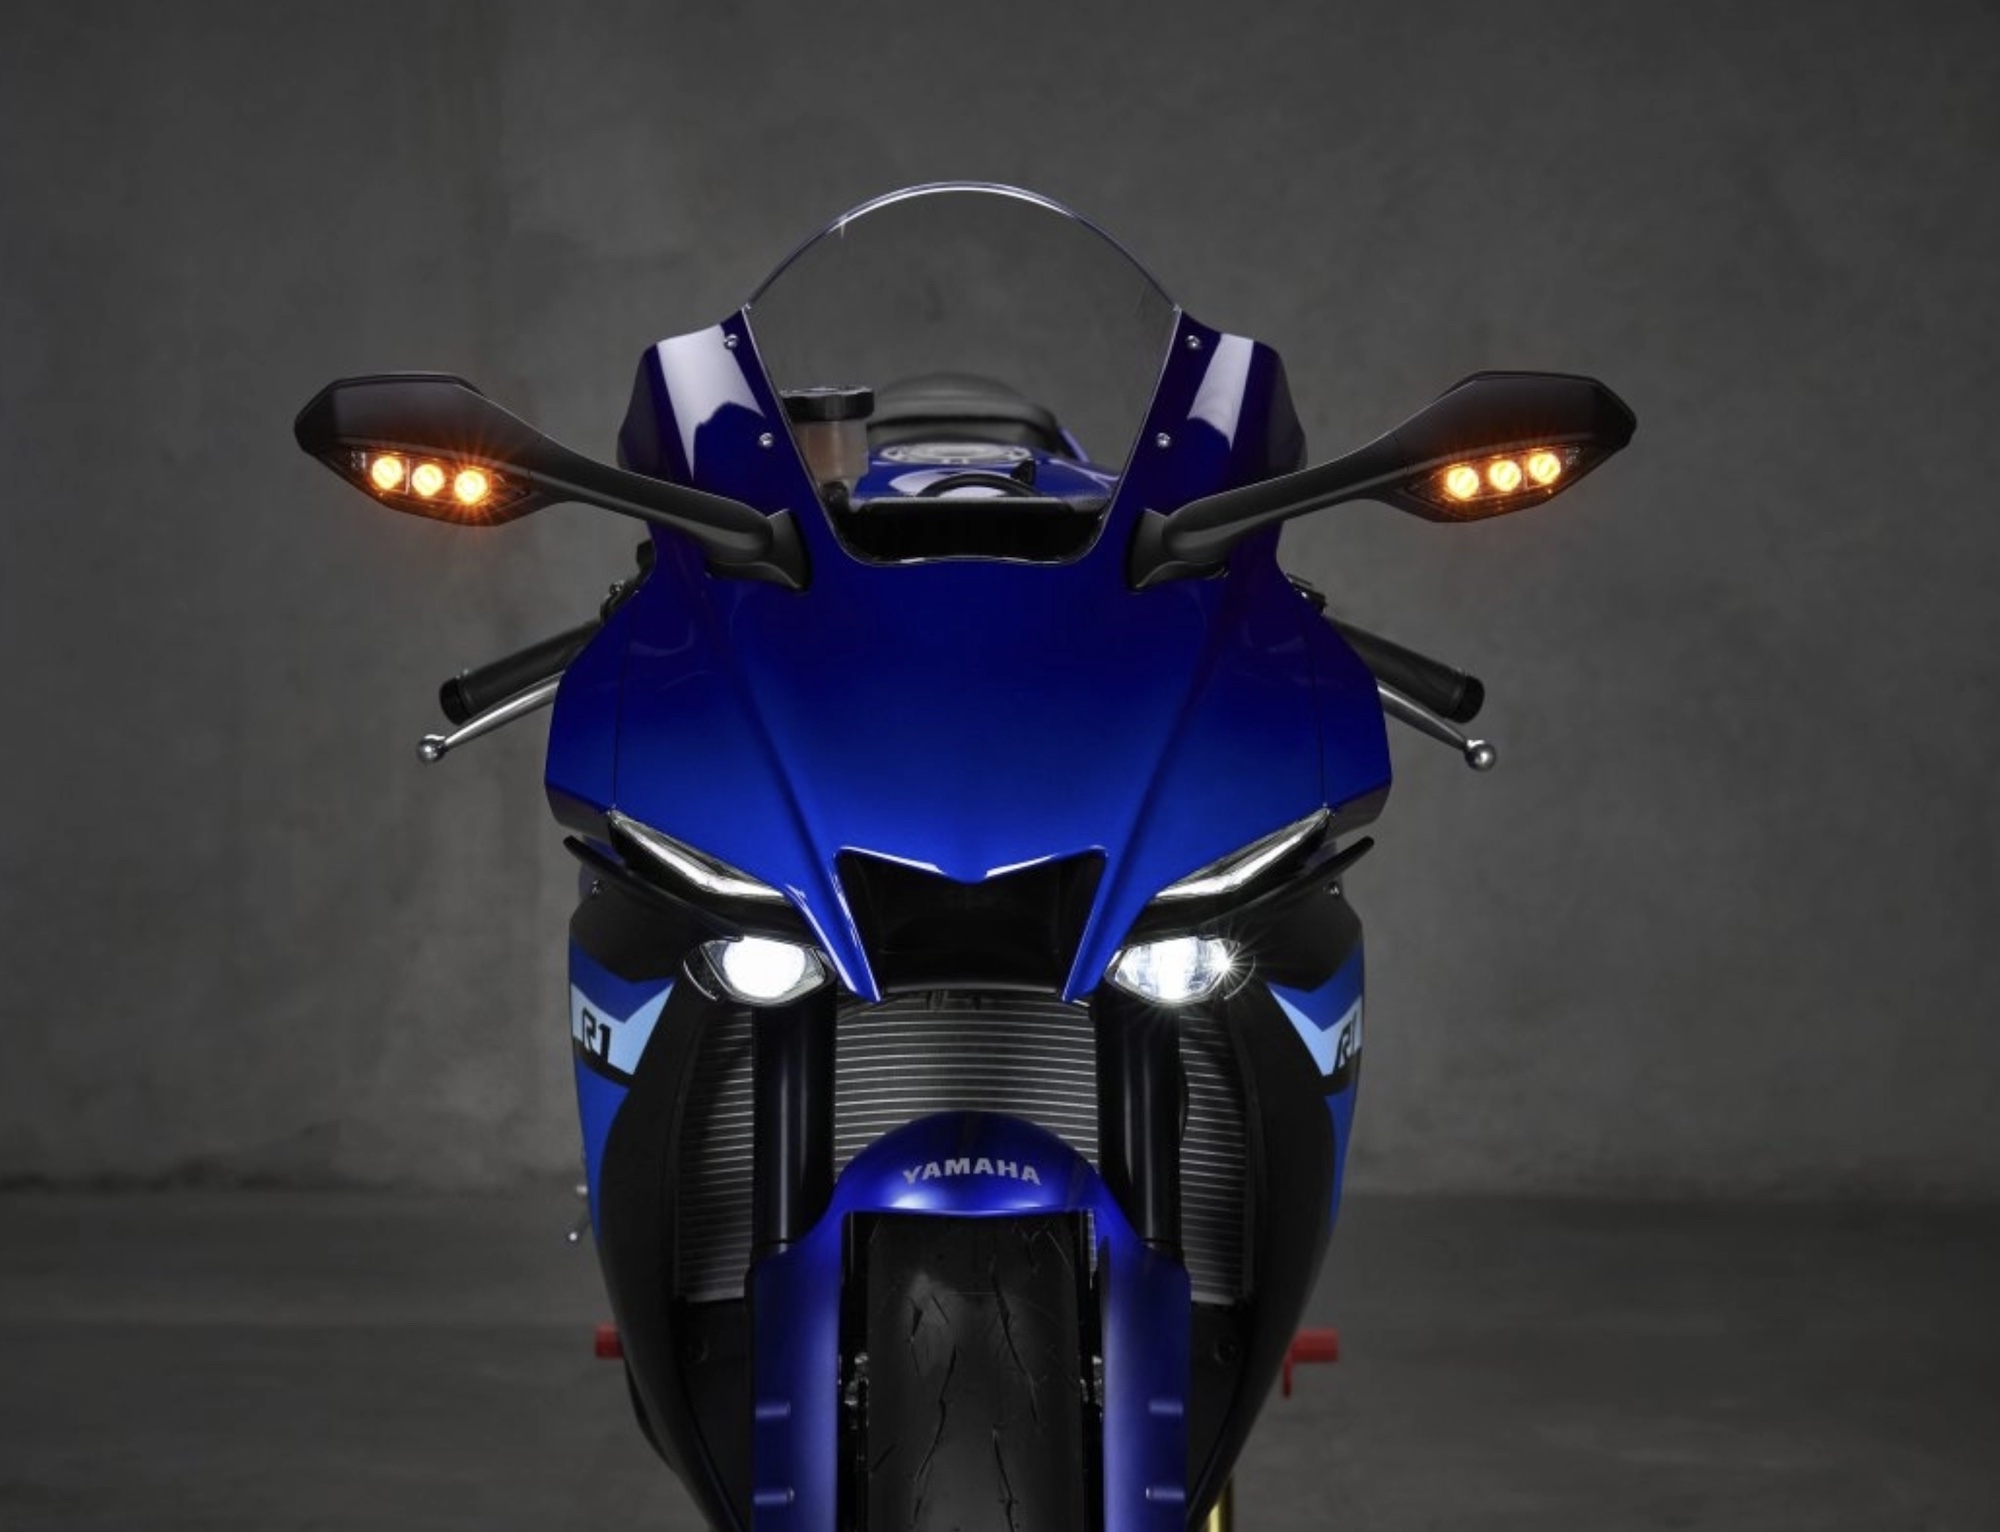 A frontal view of a Yamaha R1.